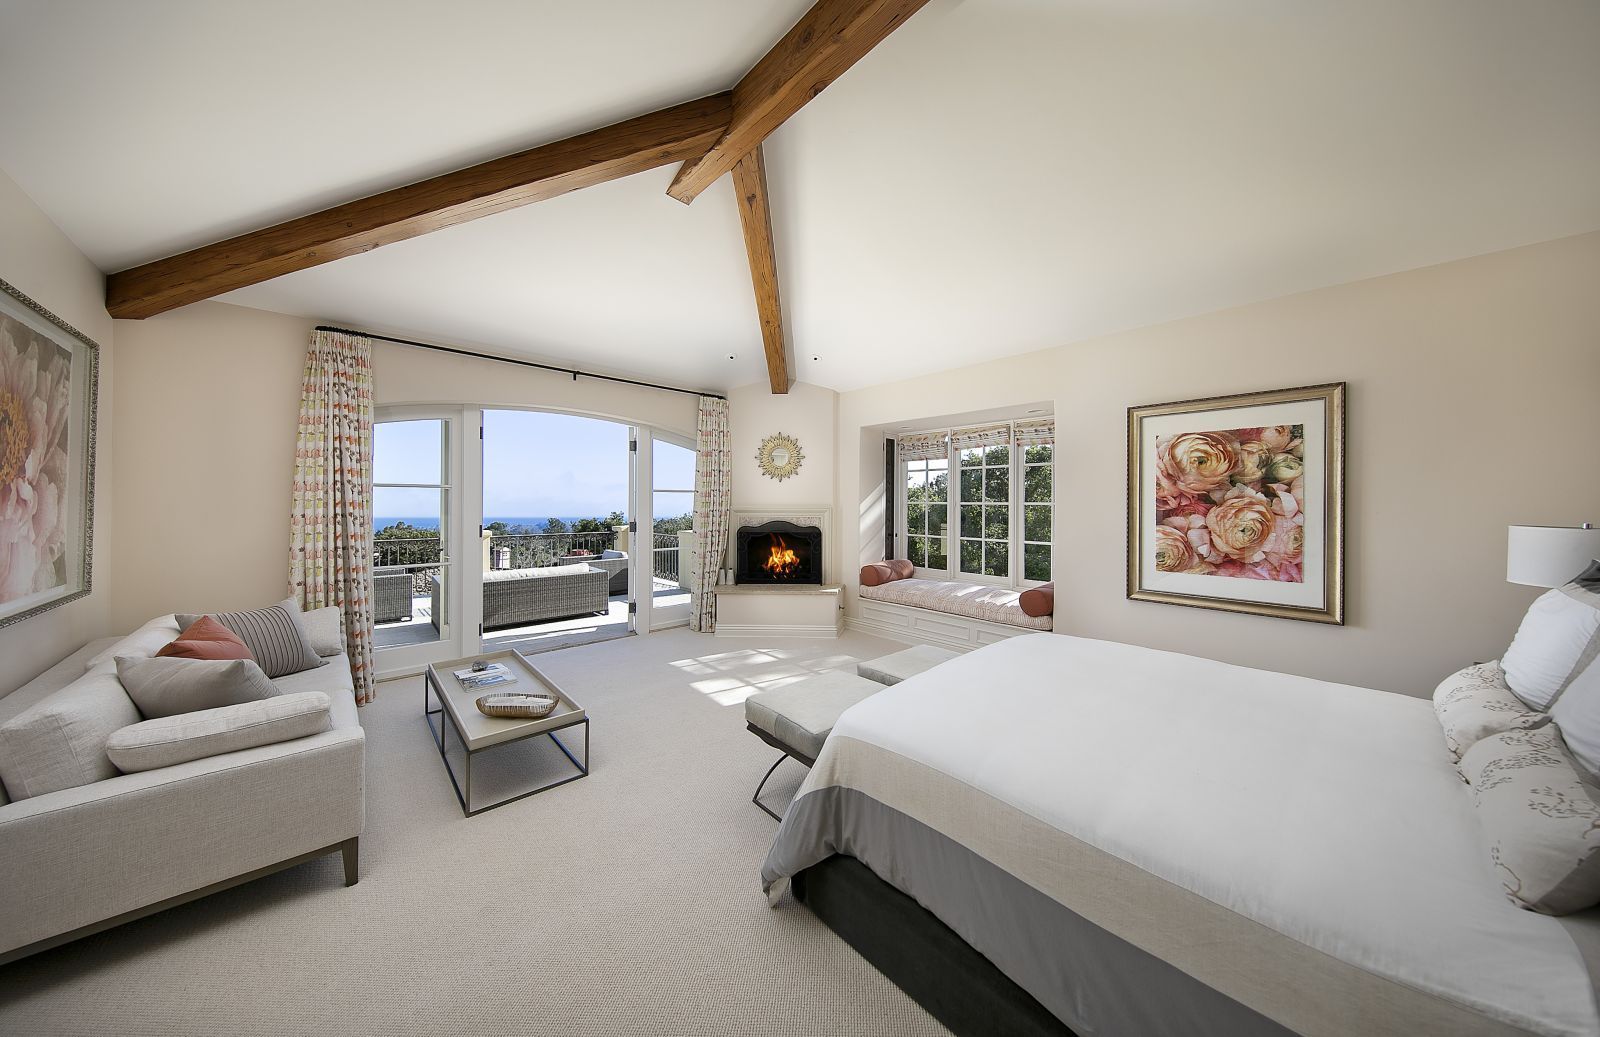 A luxury bedroom with interesting wood beams in the ceiling and a door opening with an ocean view.